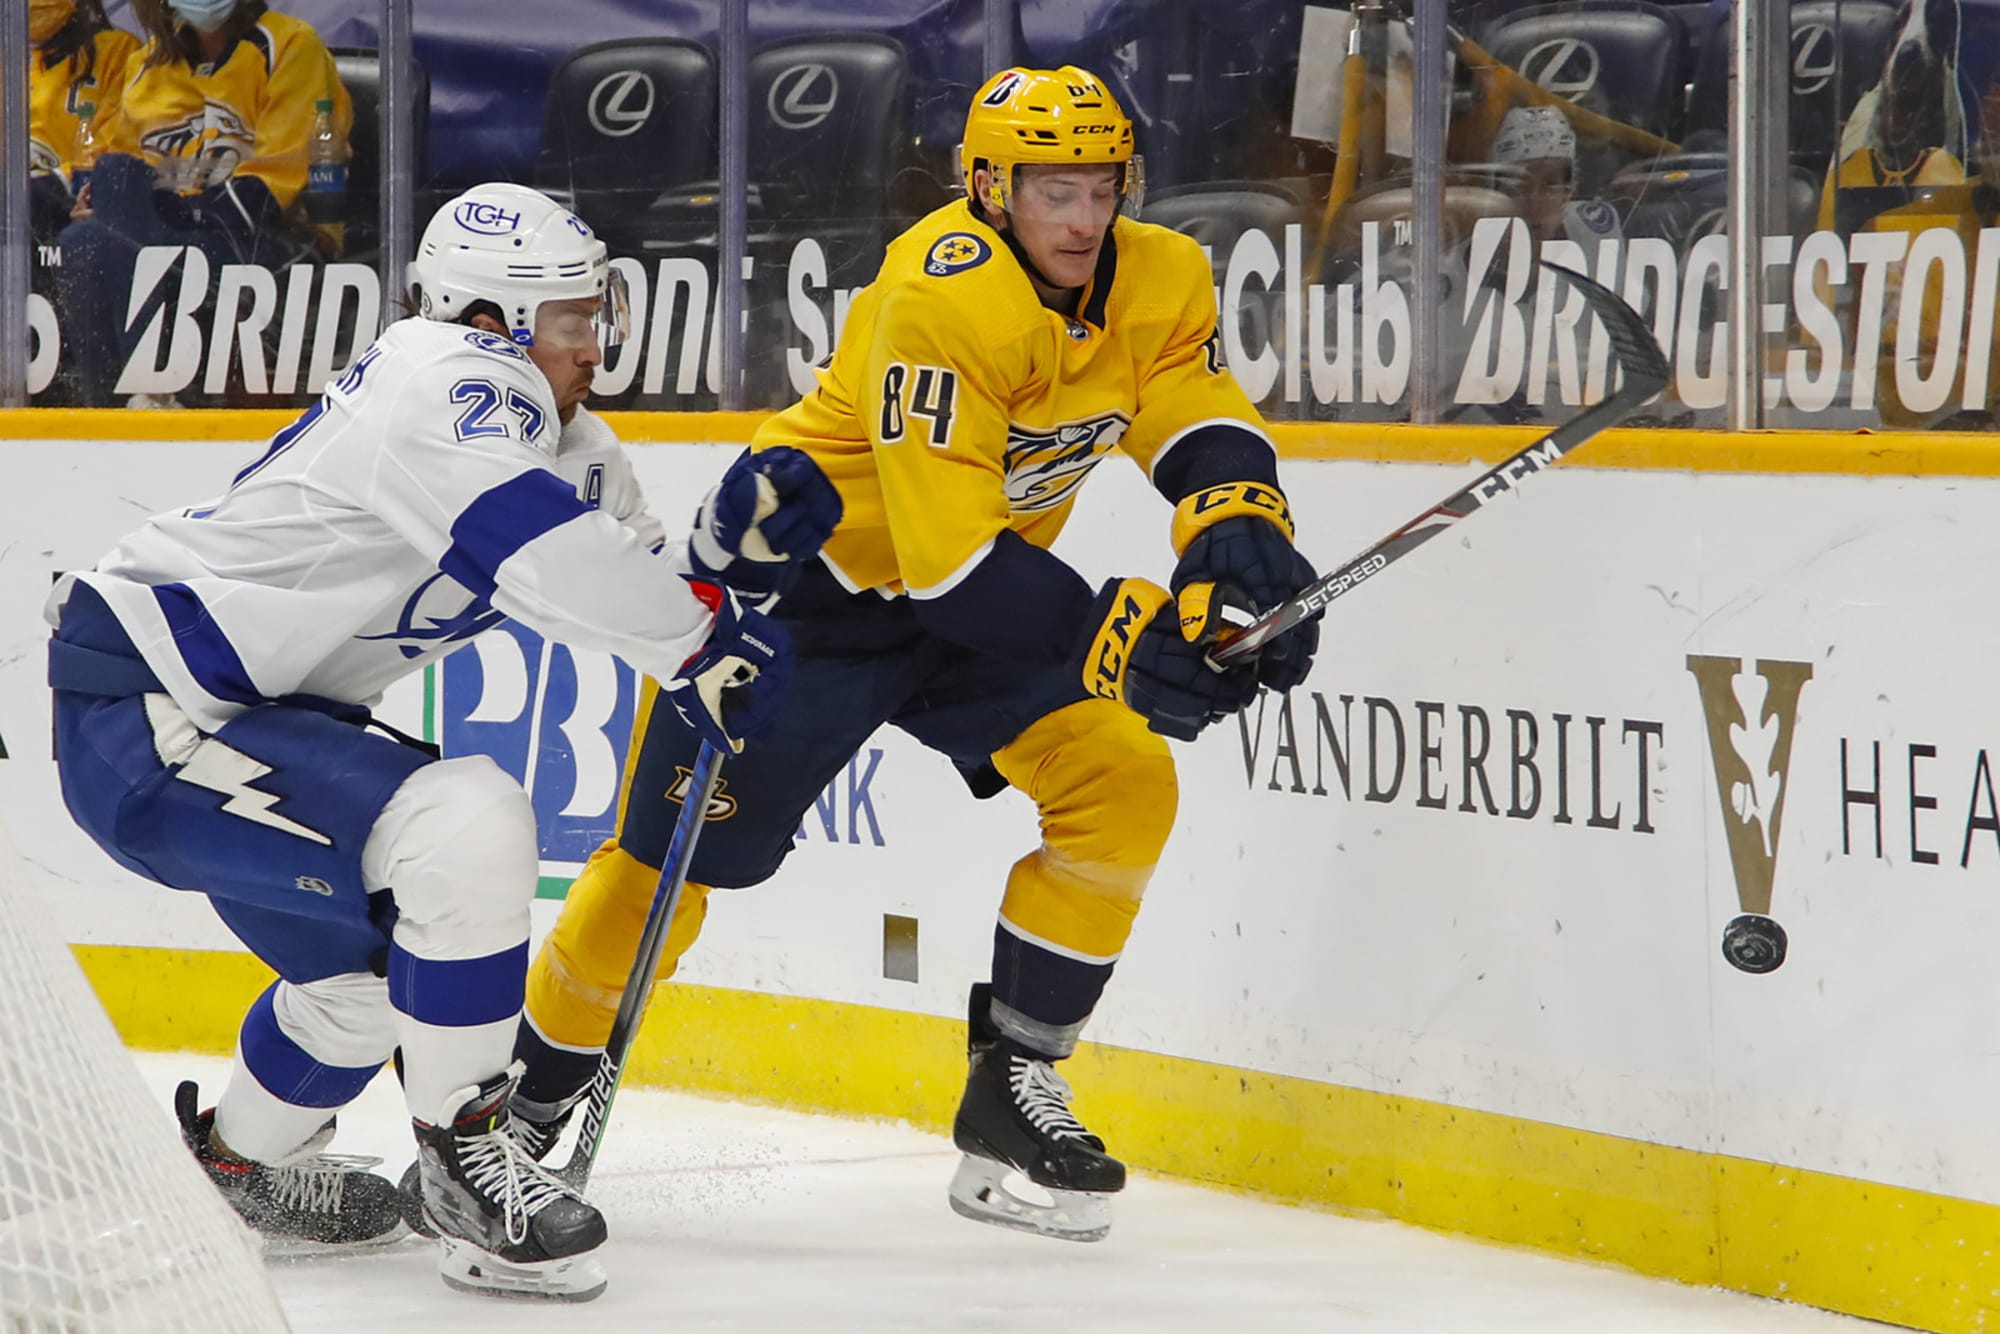 Tanner Jeannot Signs Contract Extension With the Nashville Predators